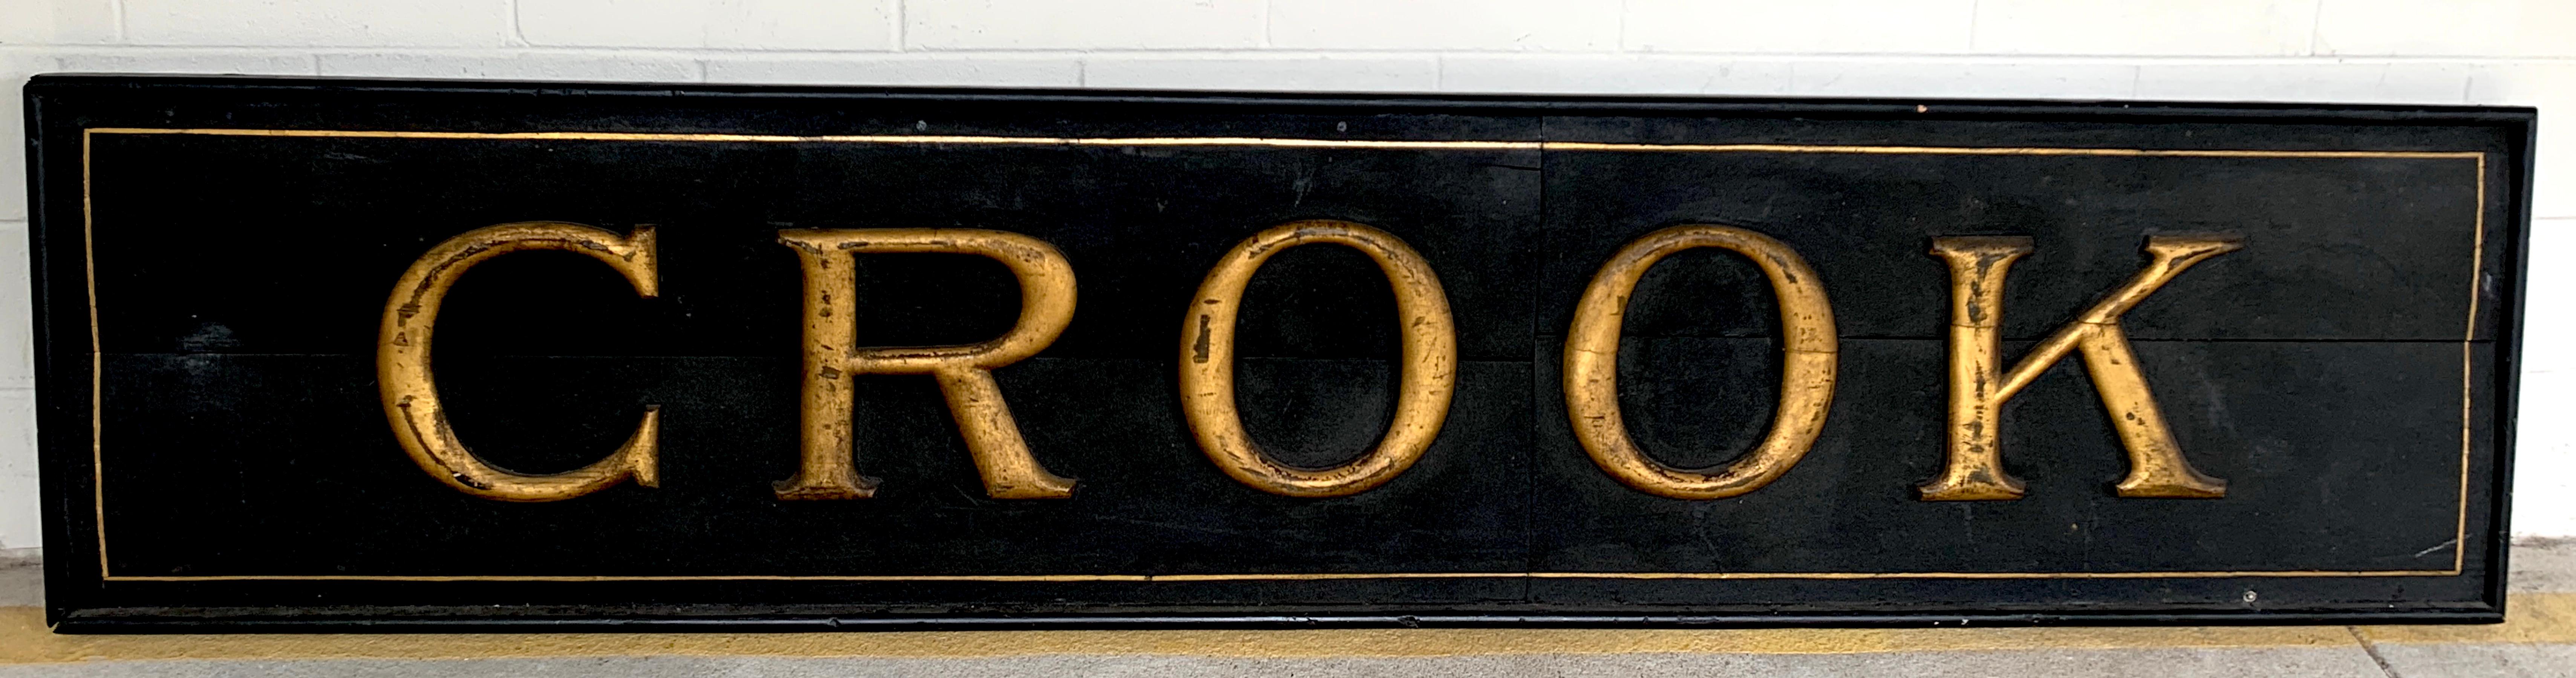 19th century American trade sign 'Crook', Medina, NY
Craftsman made, with sand-painted back ground with 10